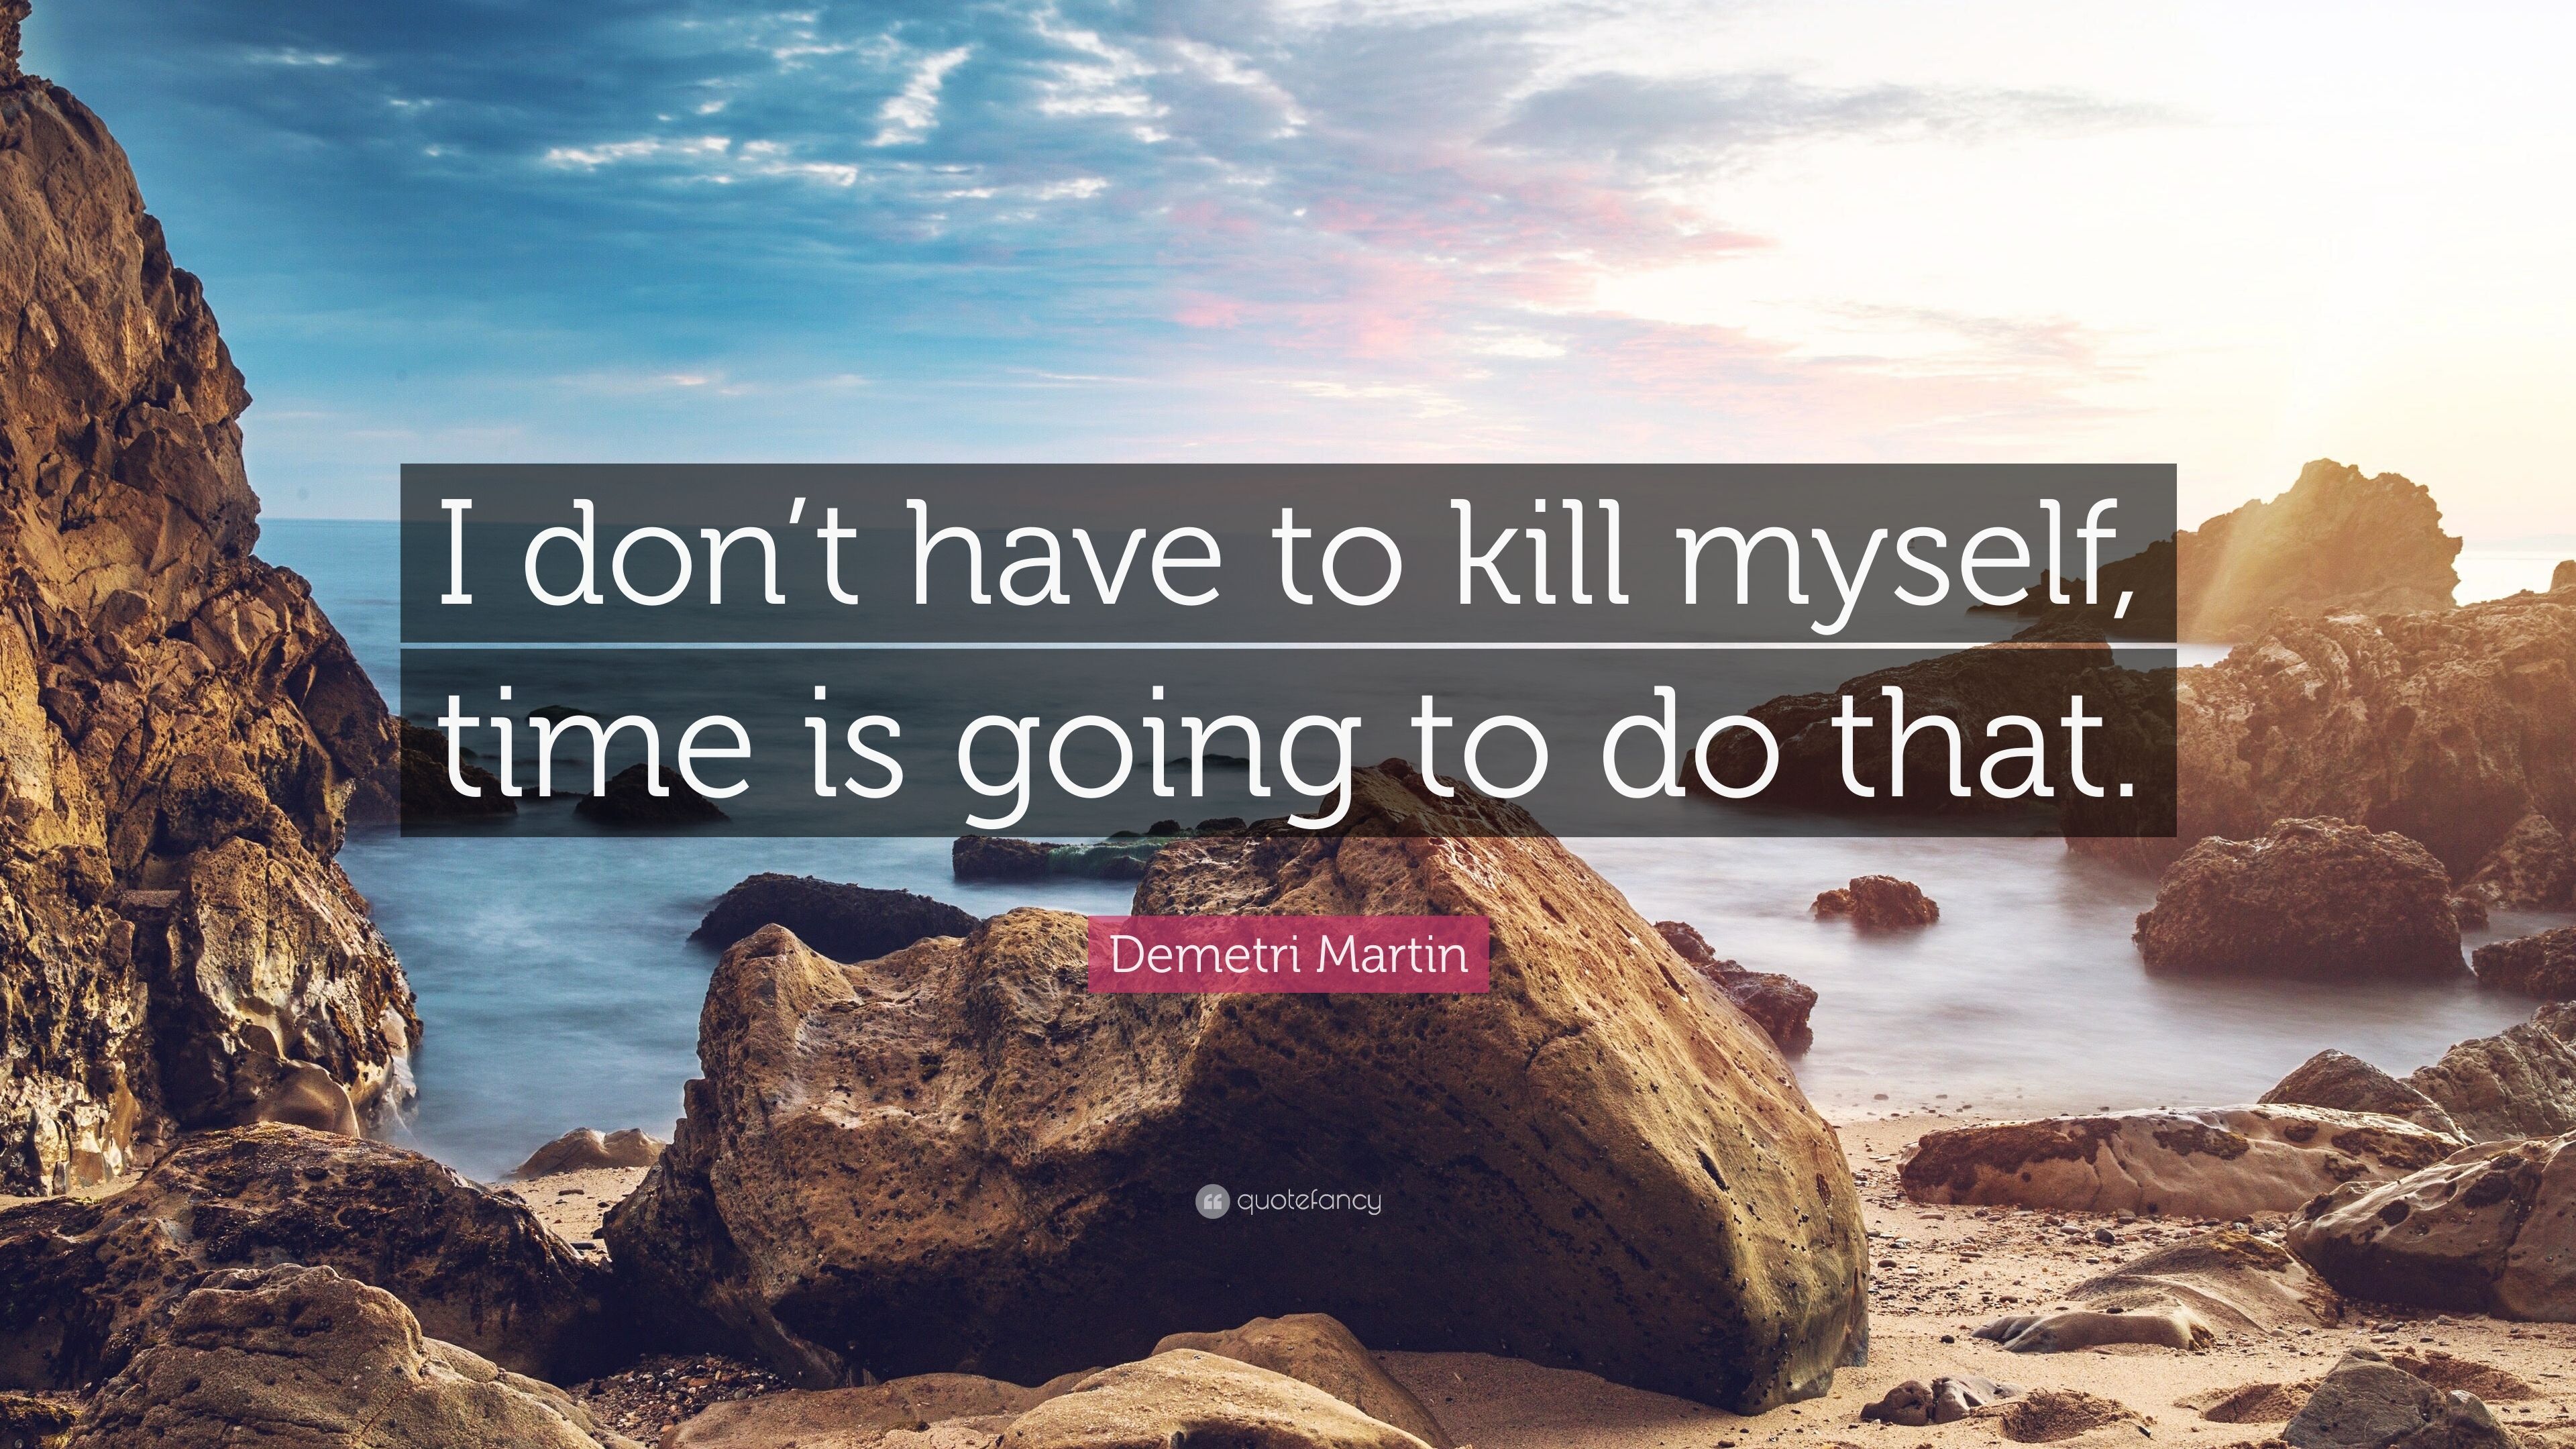 Demetri Martin Quote: “I don't have to kill myself, time is going to ...